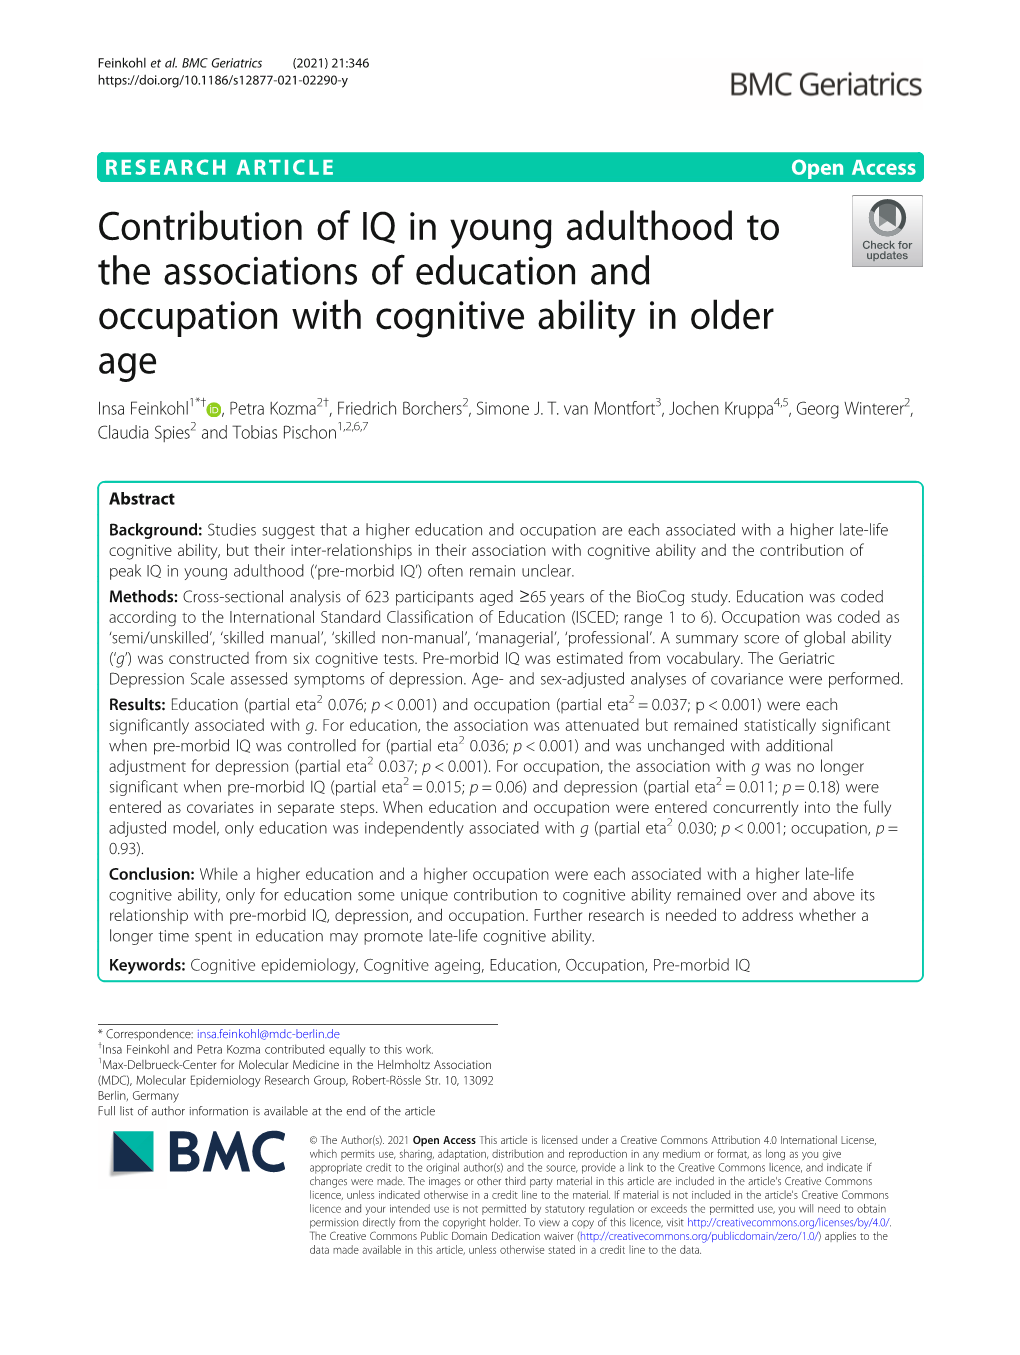 Contribution of IQ in Young Adulthood to the Associations of Education And